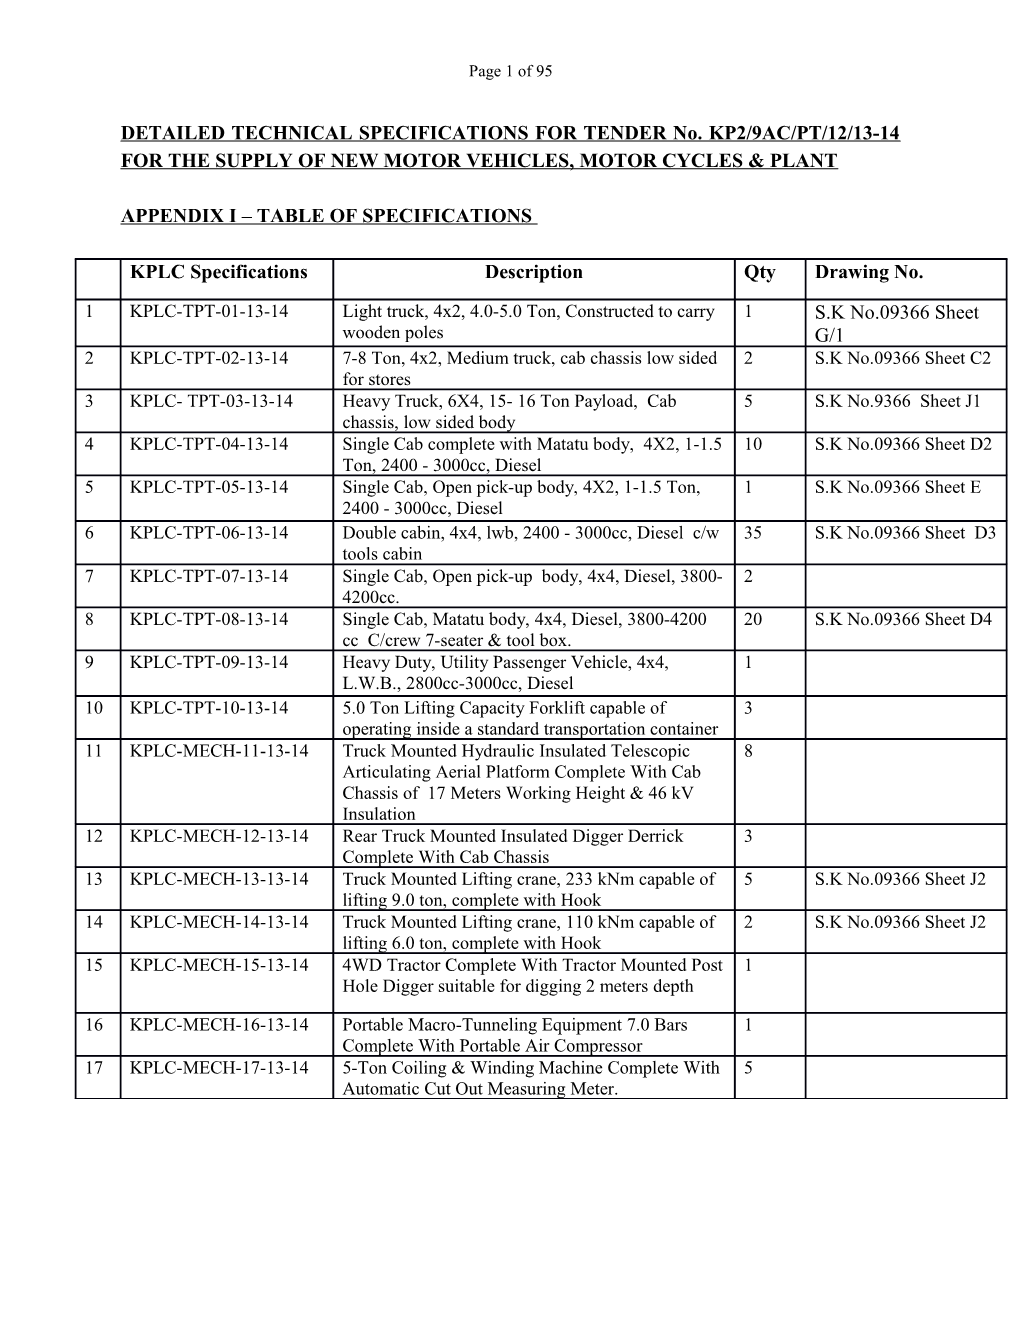 Kplc M/Vehicle, M/Cycle Plant Specifications for 2014